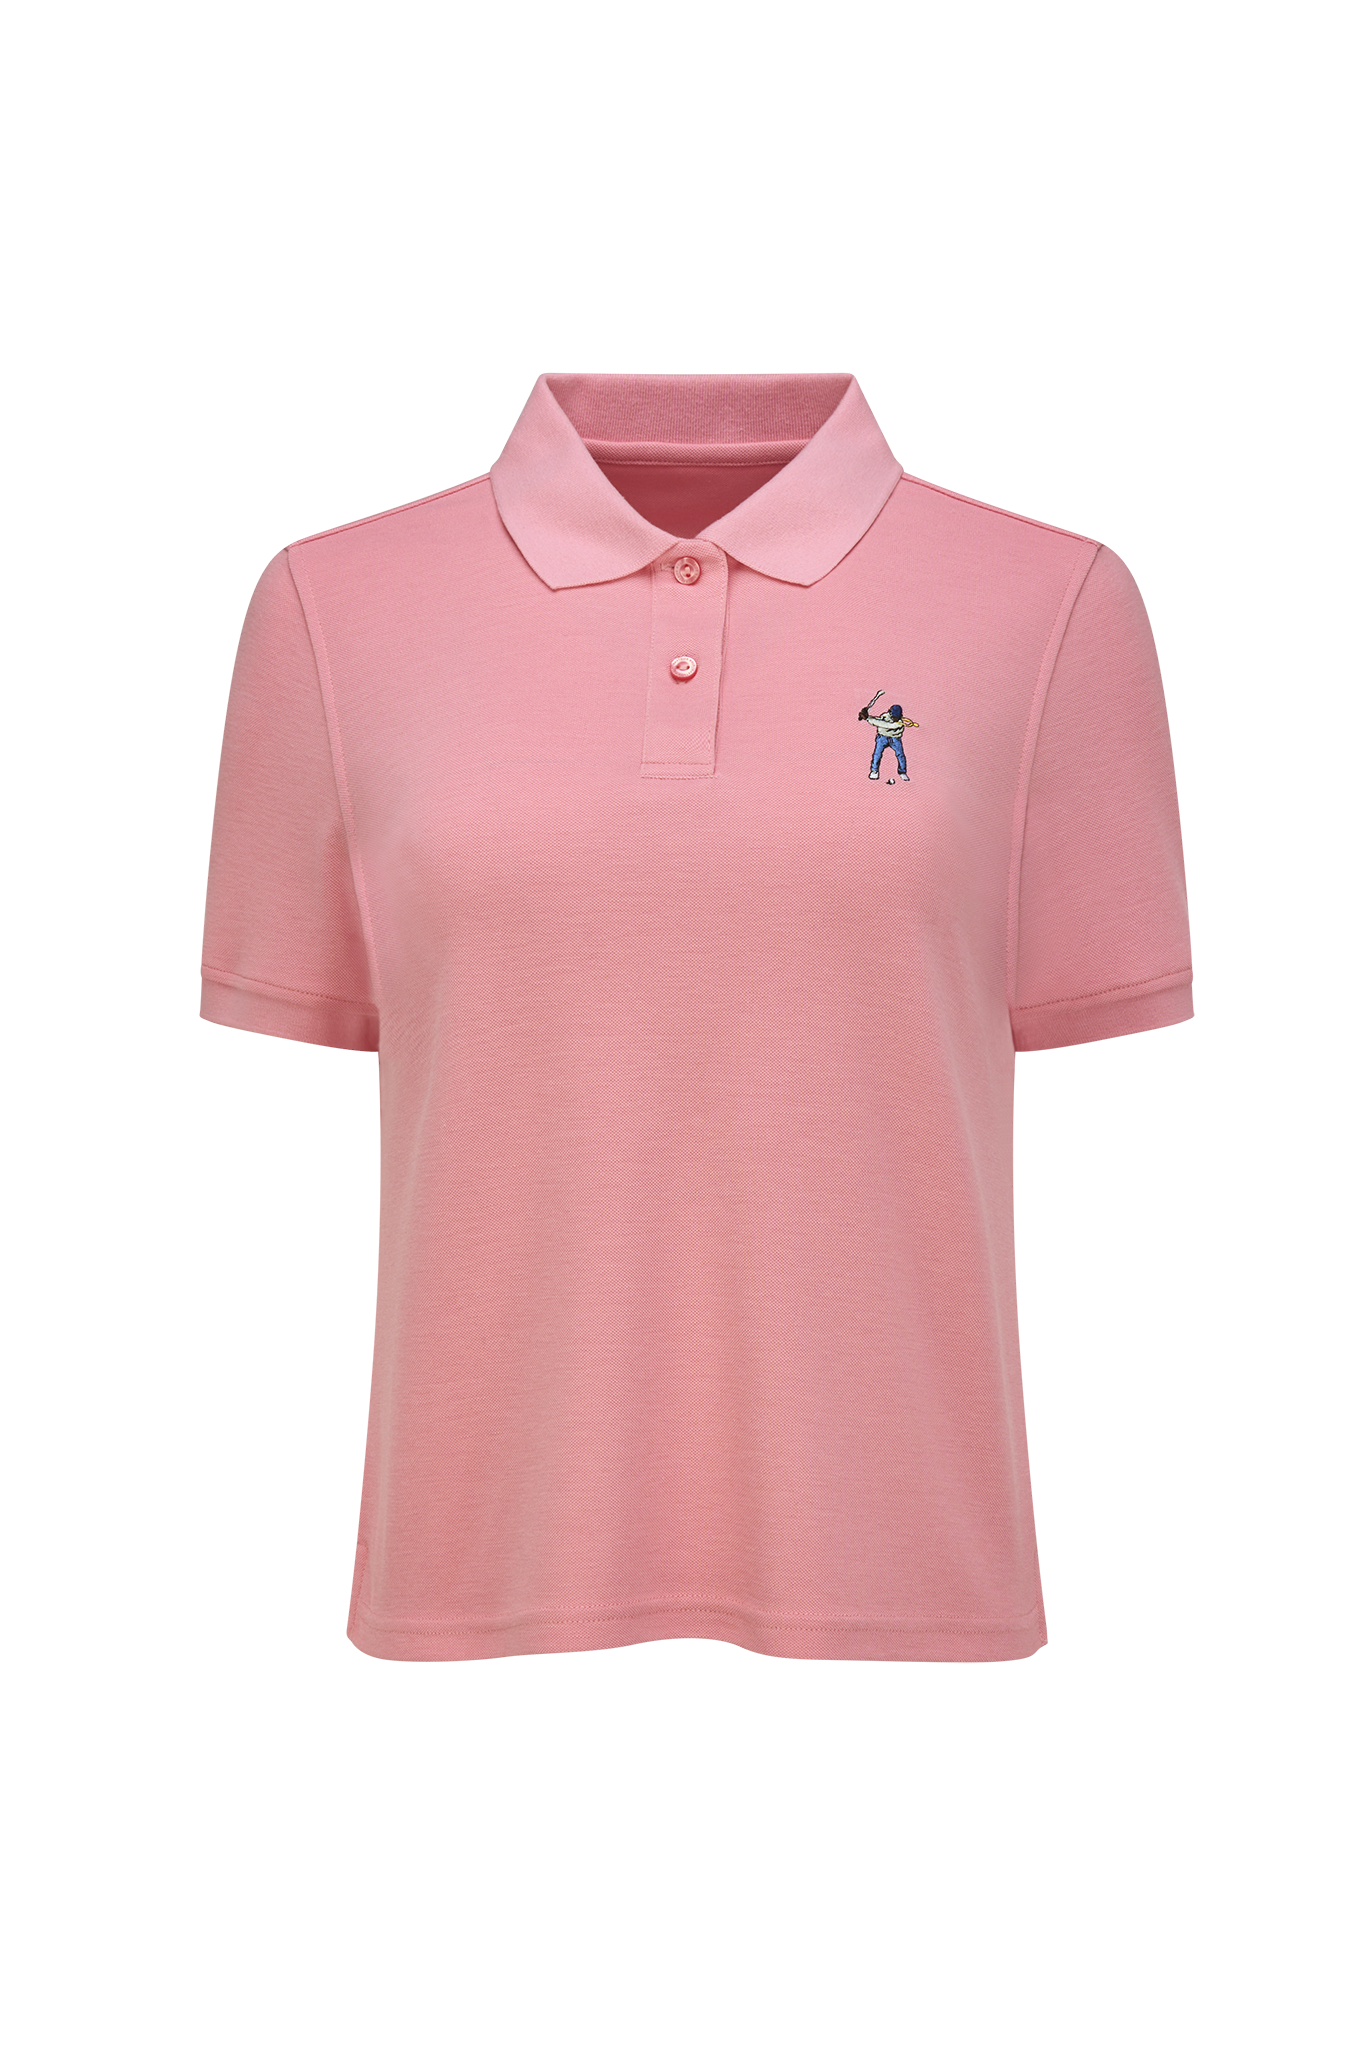 Dianthis Pink Eastside Golf Womens Classic Pique Polo